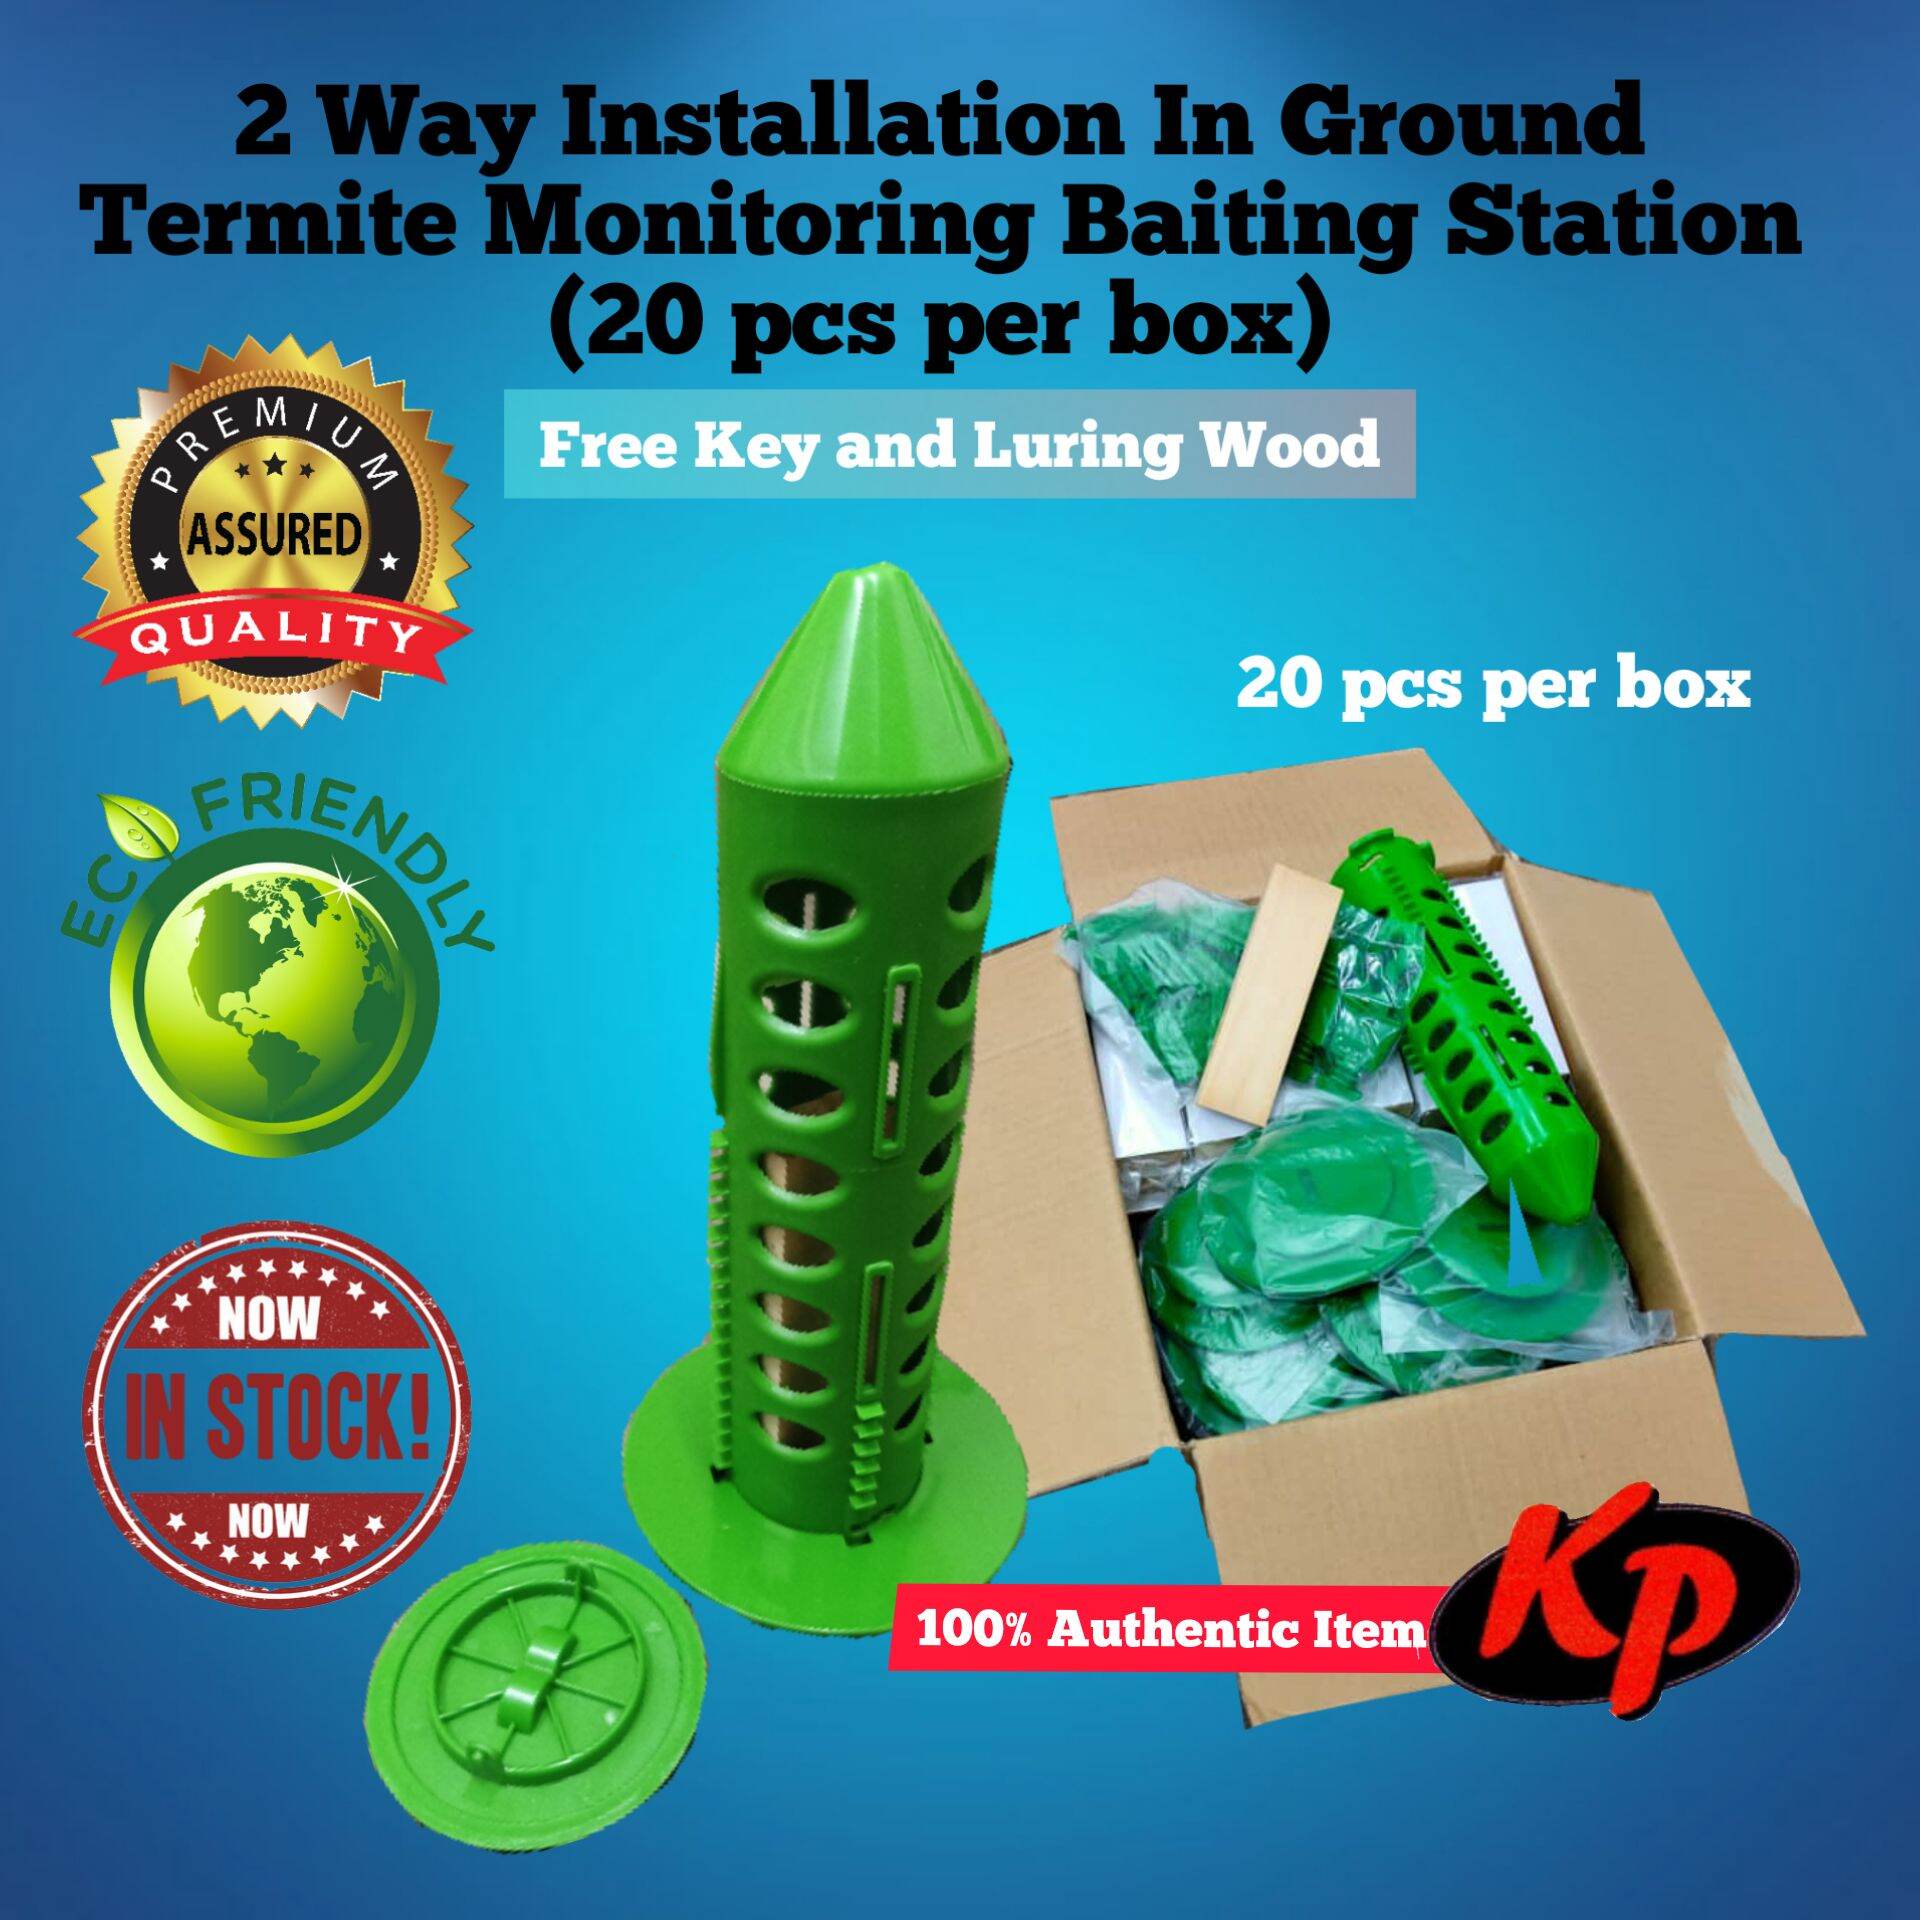 20 pcs per box) 2 Way Installation In Ground (IG) & In Concrete (IC) Termite  Bait Station with key lock and luring wood